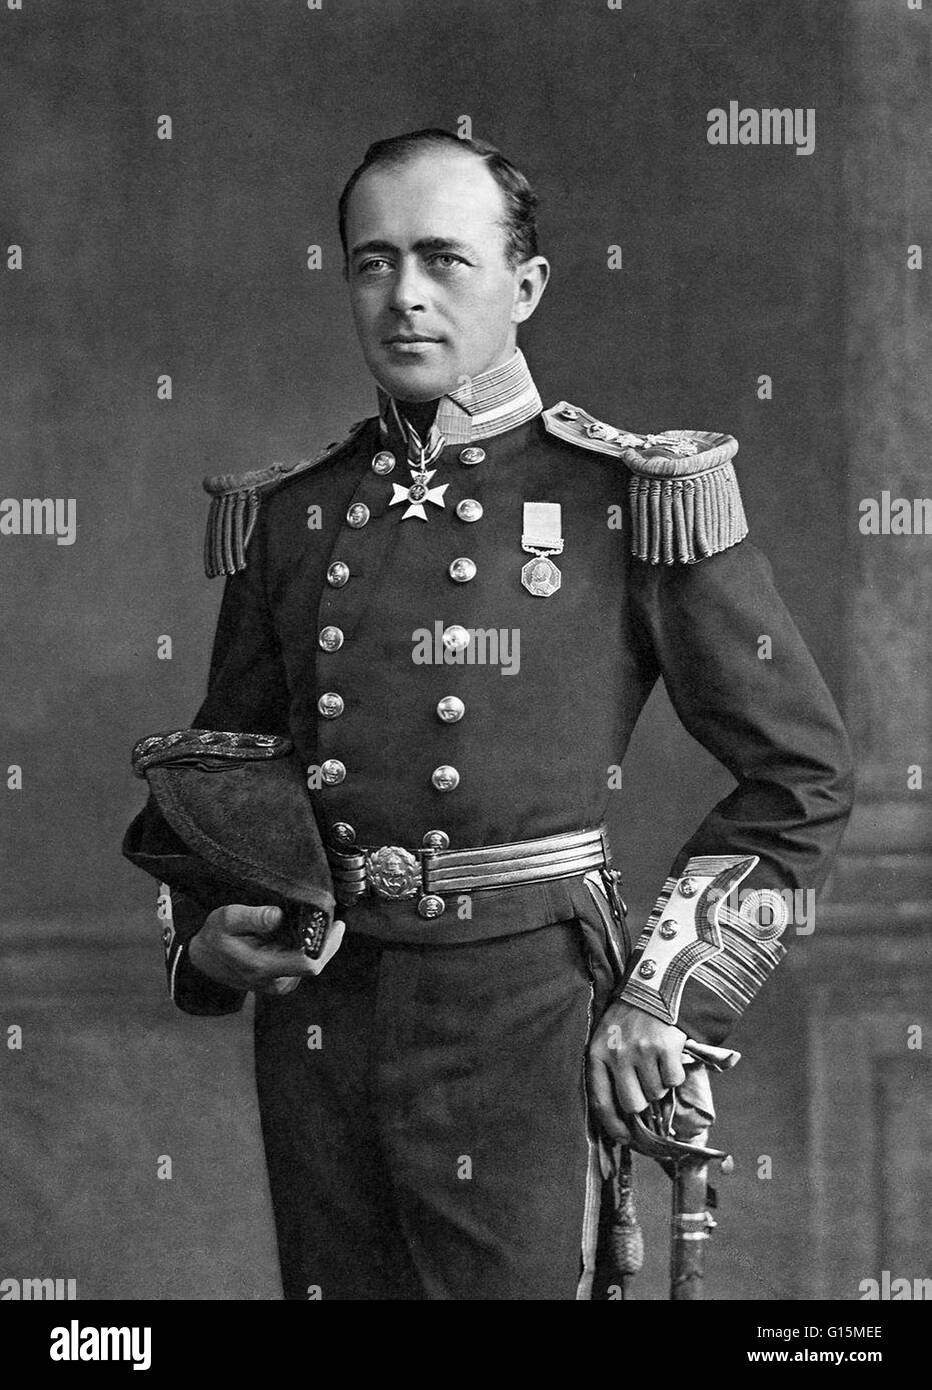 Robert Falcon Scott (June 6, 1868 - March 29, 1912) was a Royal Navy officer and explorer who led two expeditions to the Antarctic regions: the Discovery Expedition, 1901-04, and the ill-fated Terra Nova Expedition, 1910-13. During this second venture, Sc Stock Photo